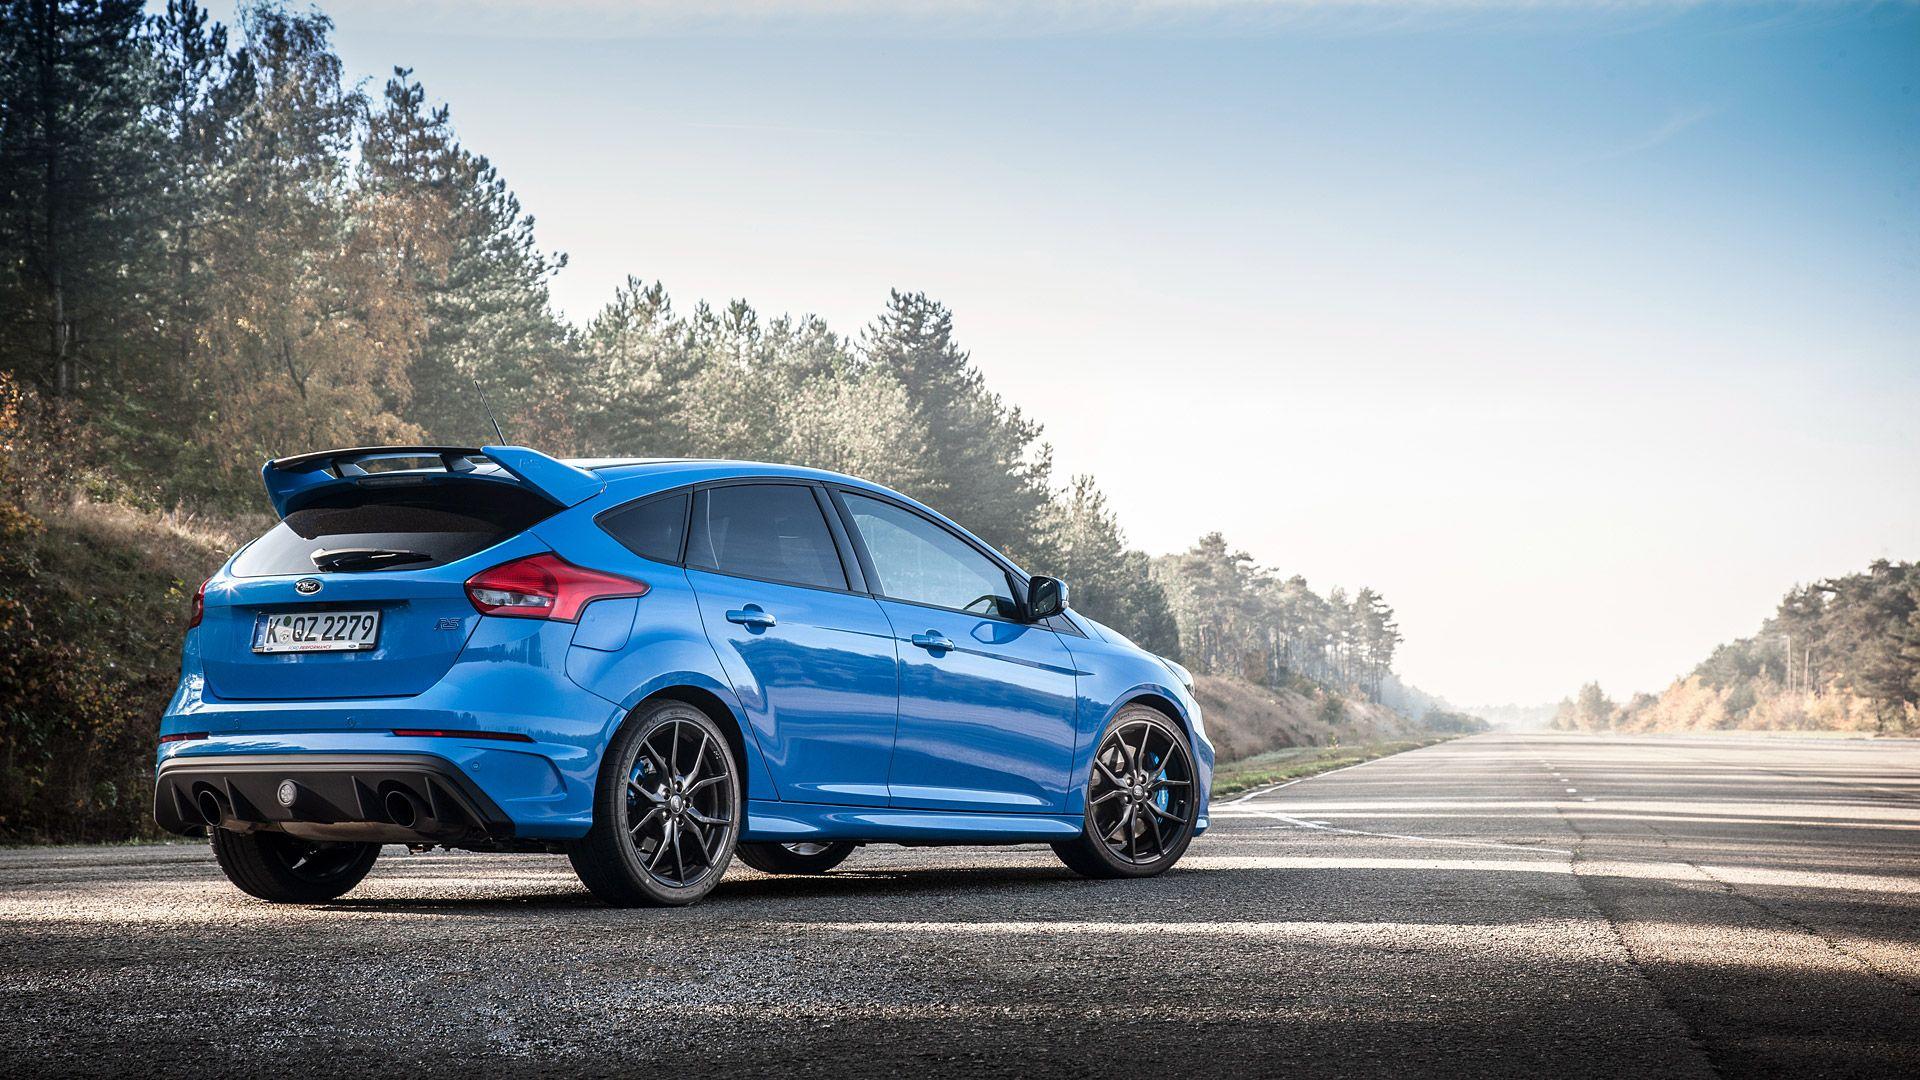 Focus Rs Wallpapers Top Free Focus Rs Backgrounds Wallpaperaccess